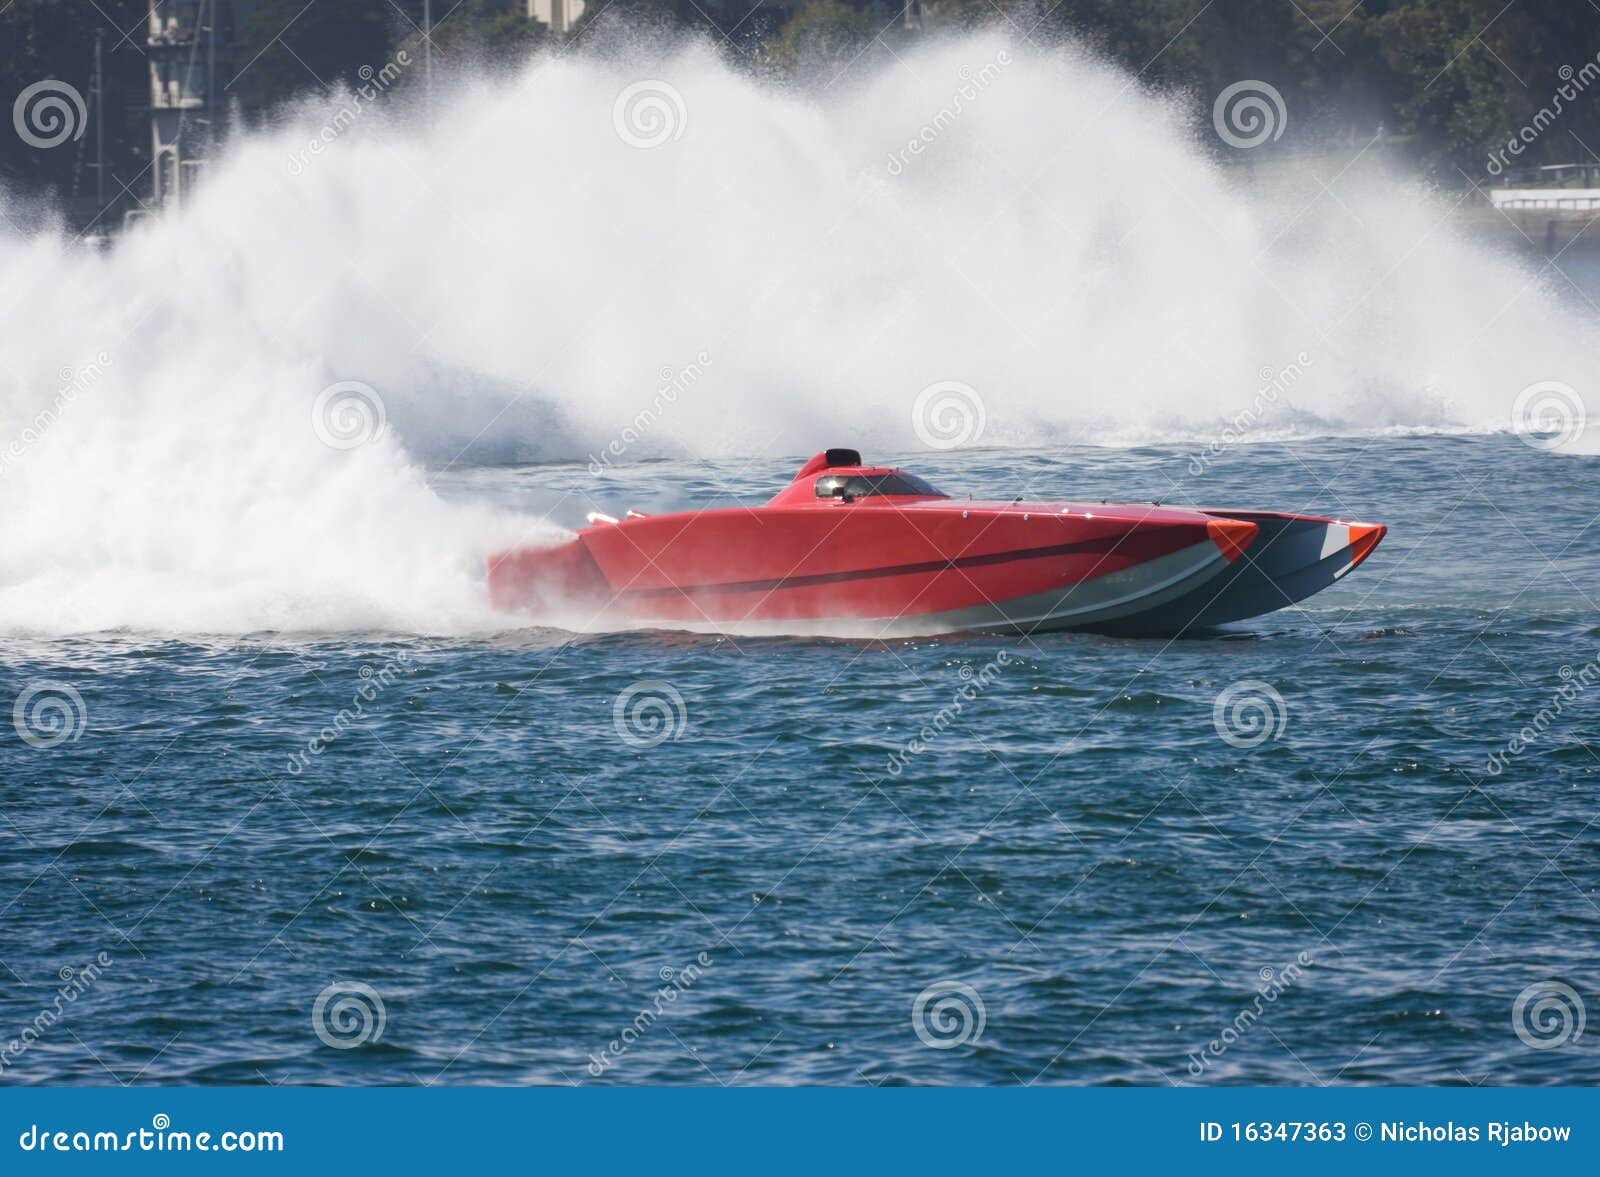 powerboat approaching large vessel